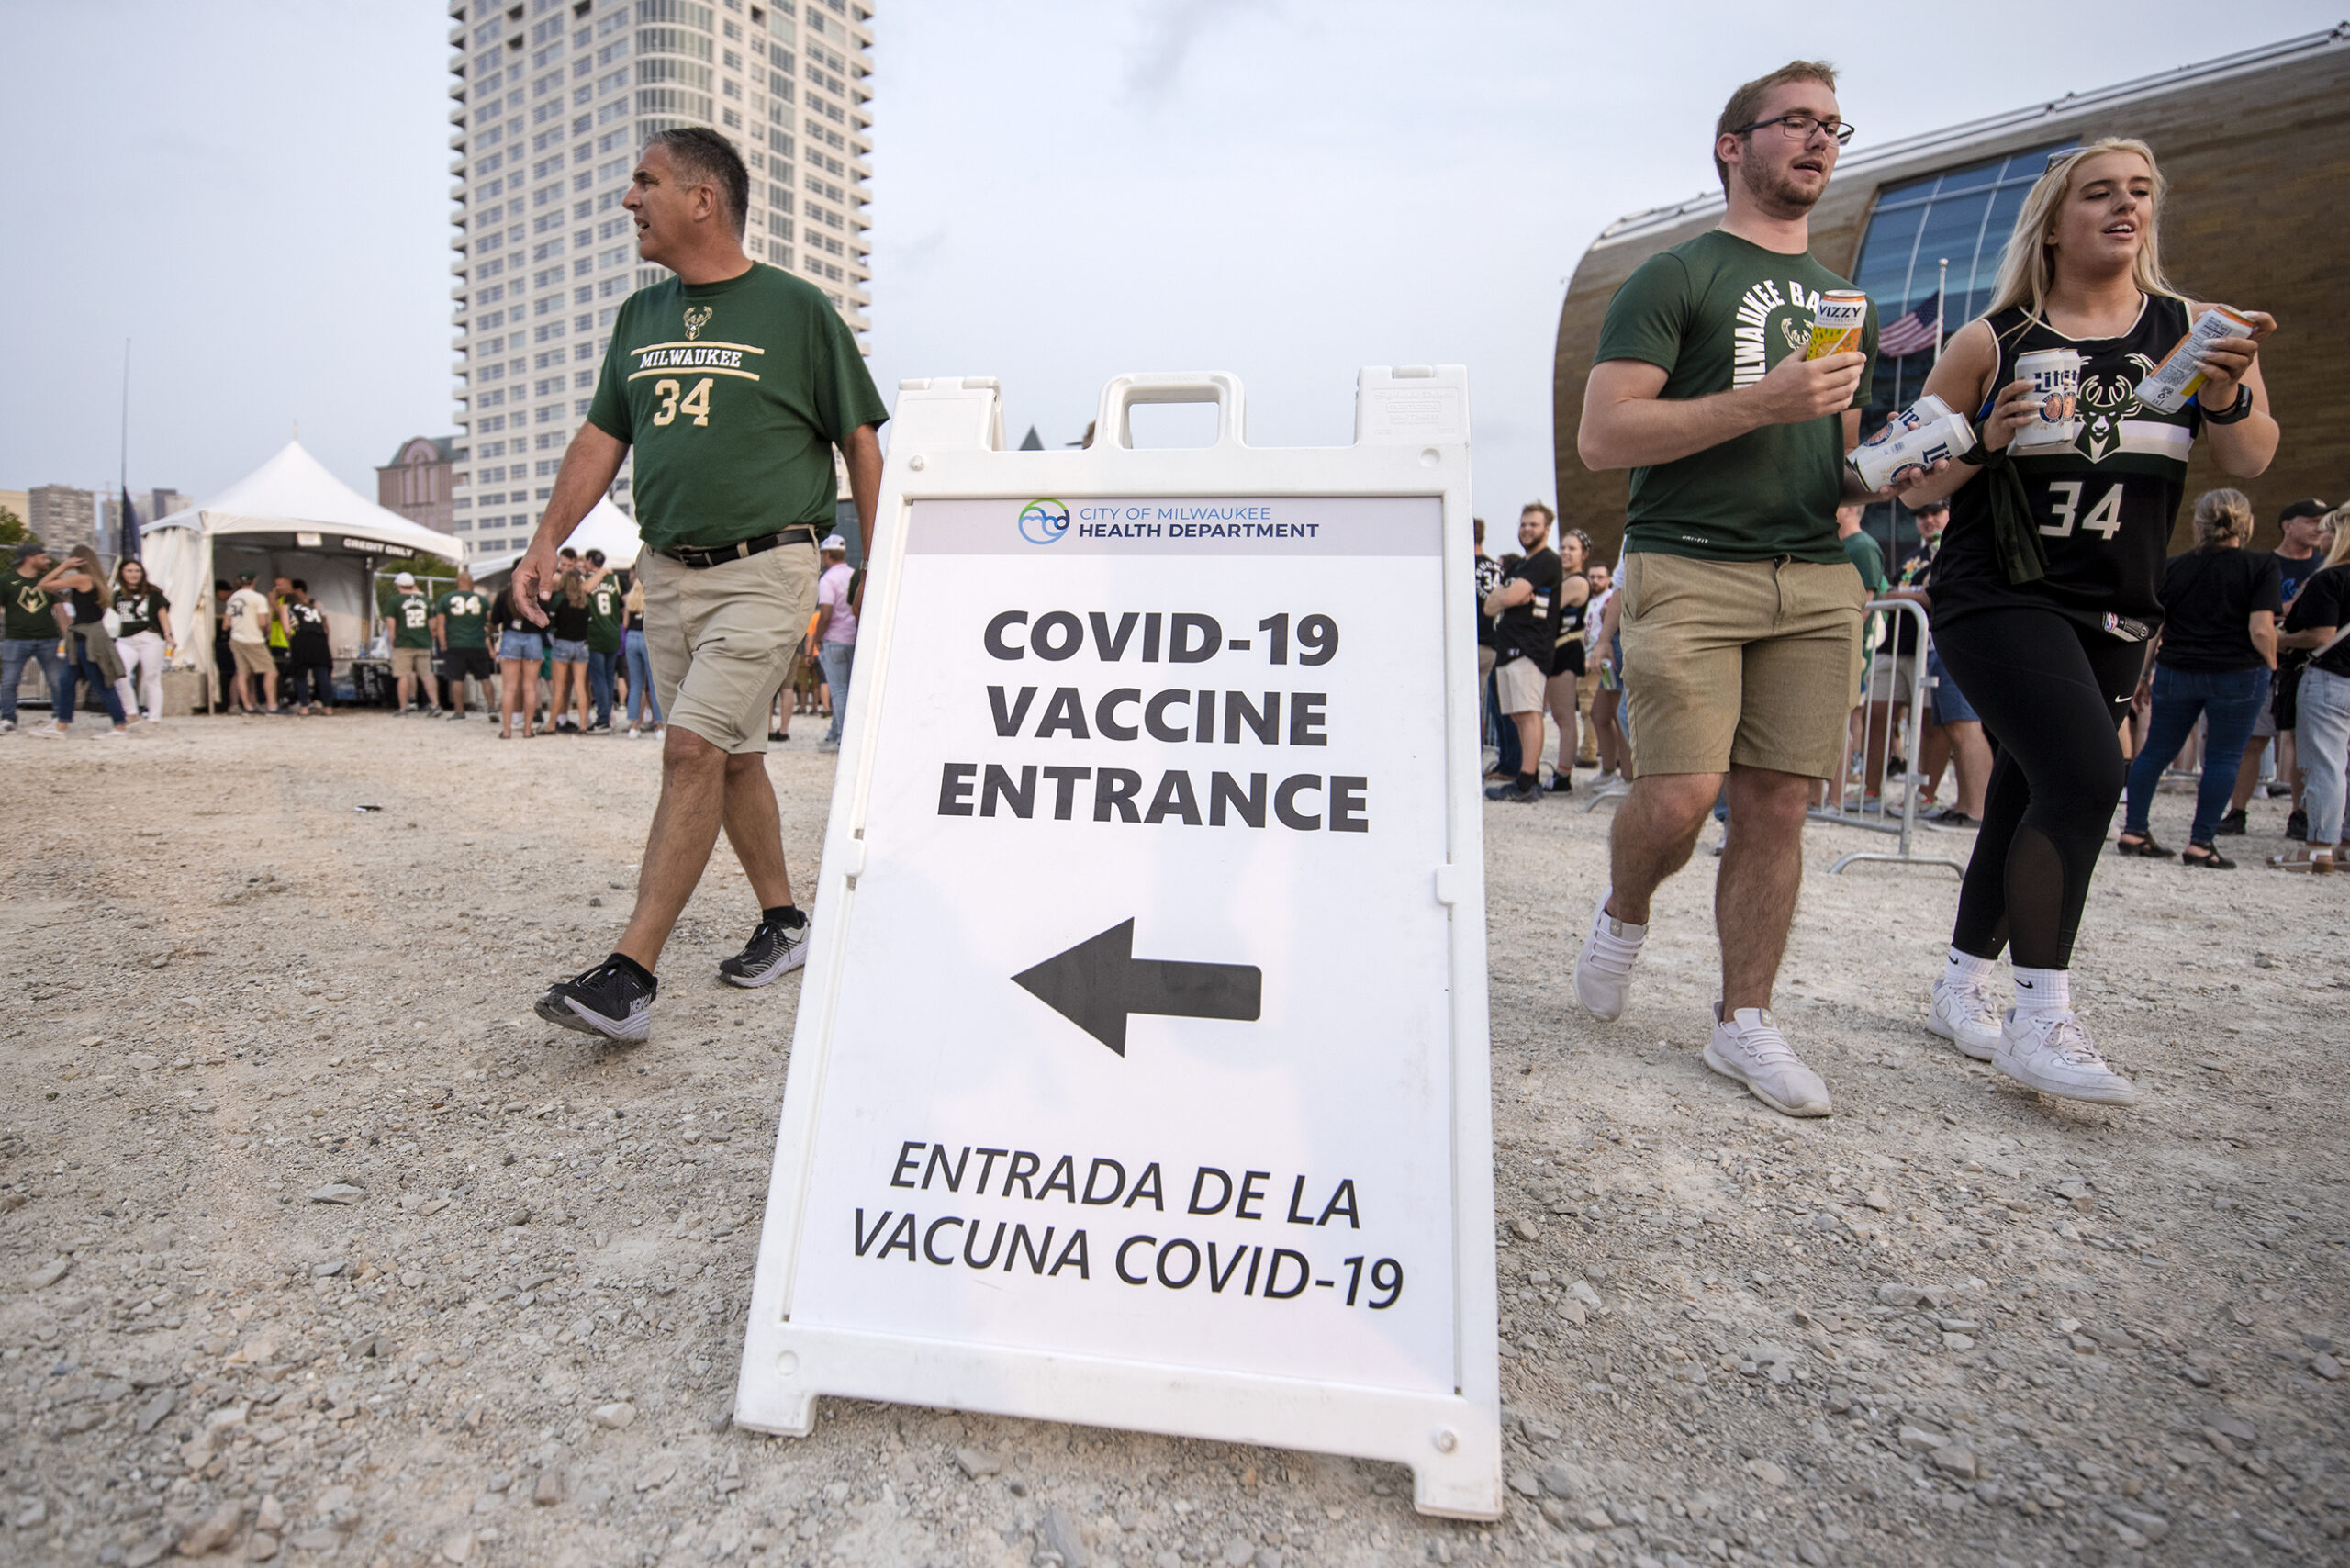 A sign says "COVID-19 Vaccine Entrance" as fans walk by holding drinks.